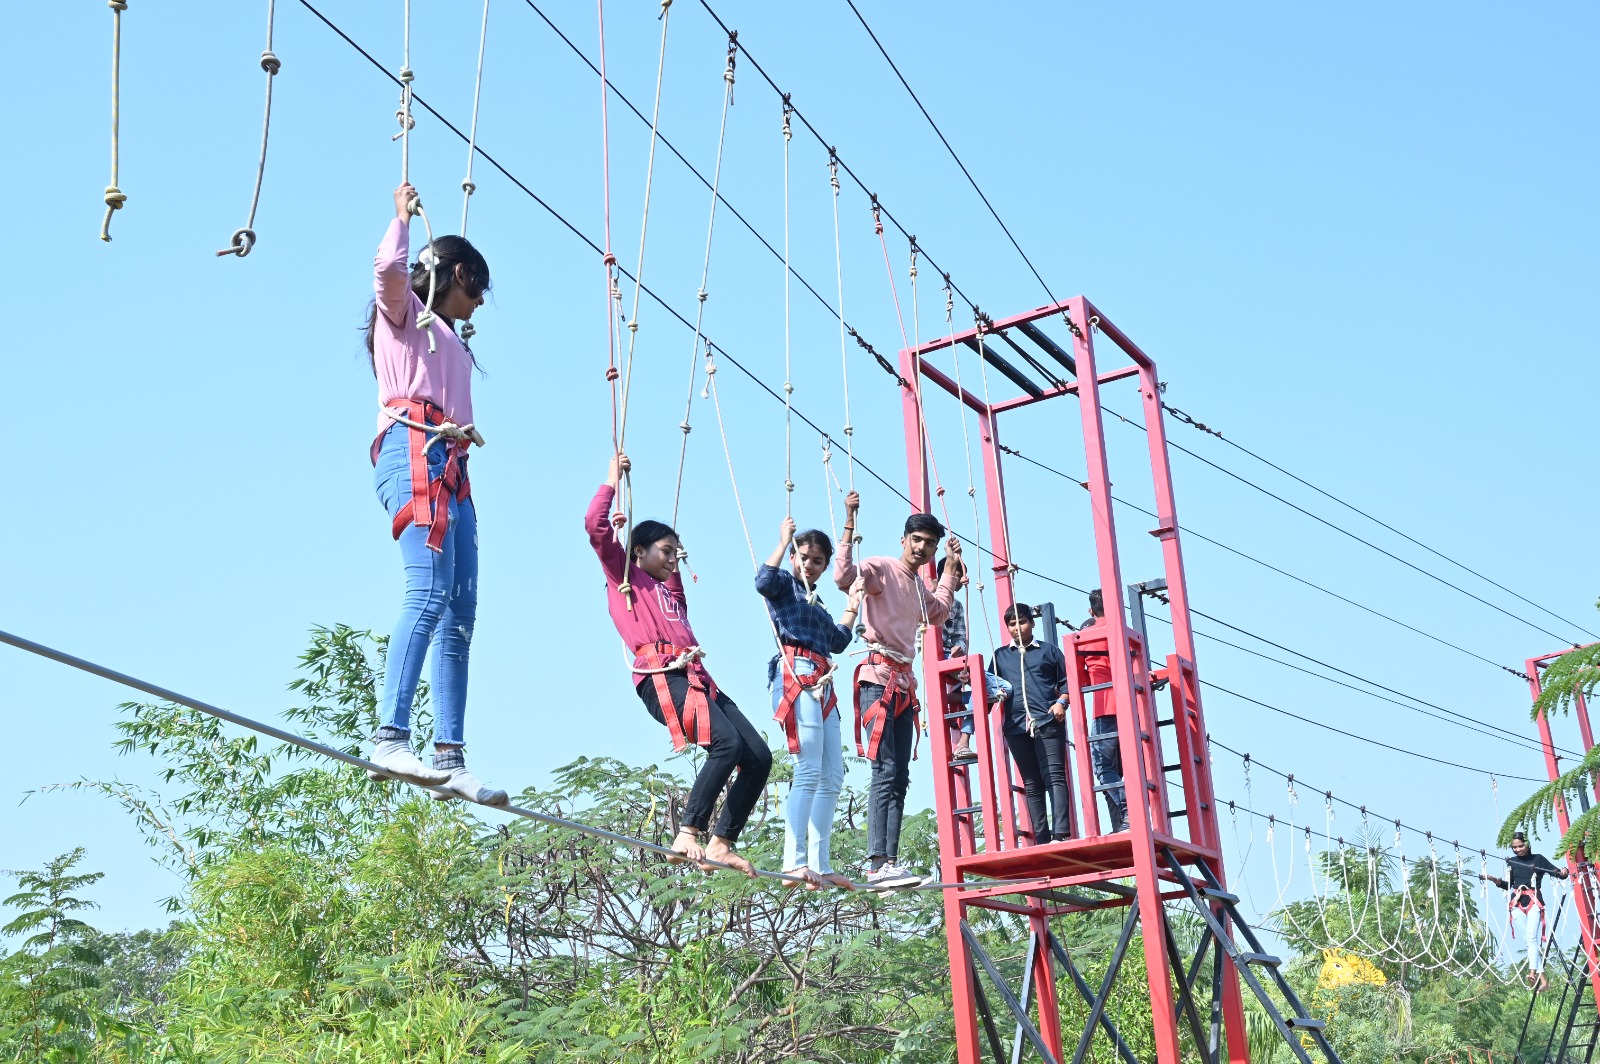 Activities at Camp Unity